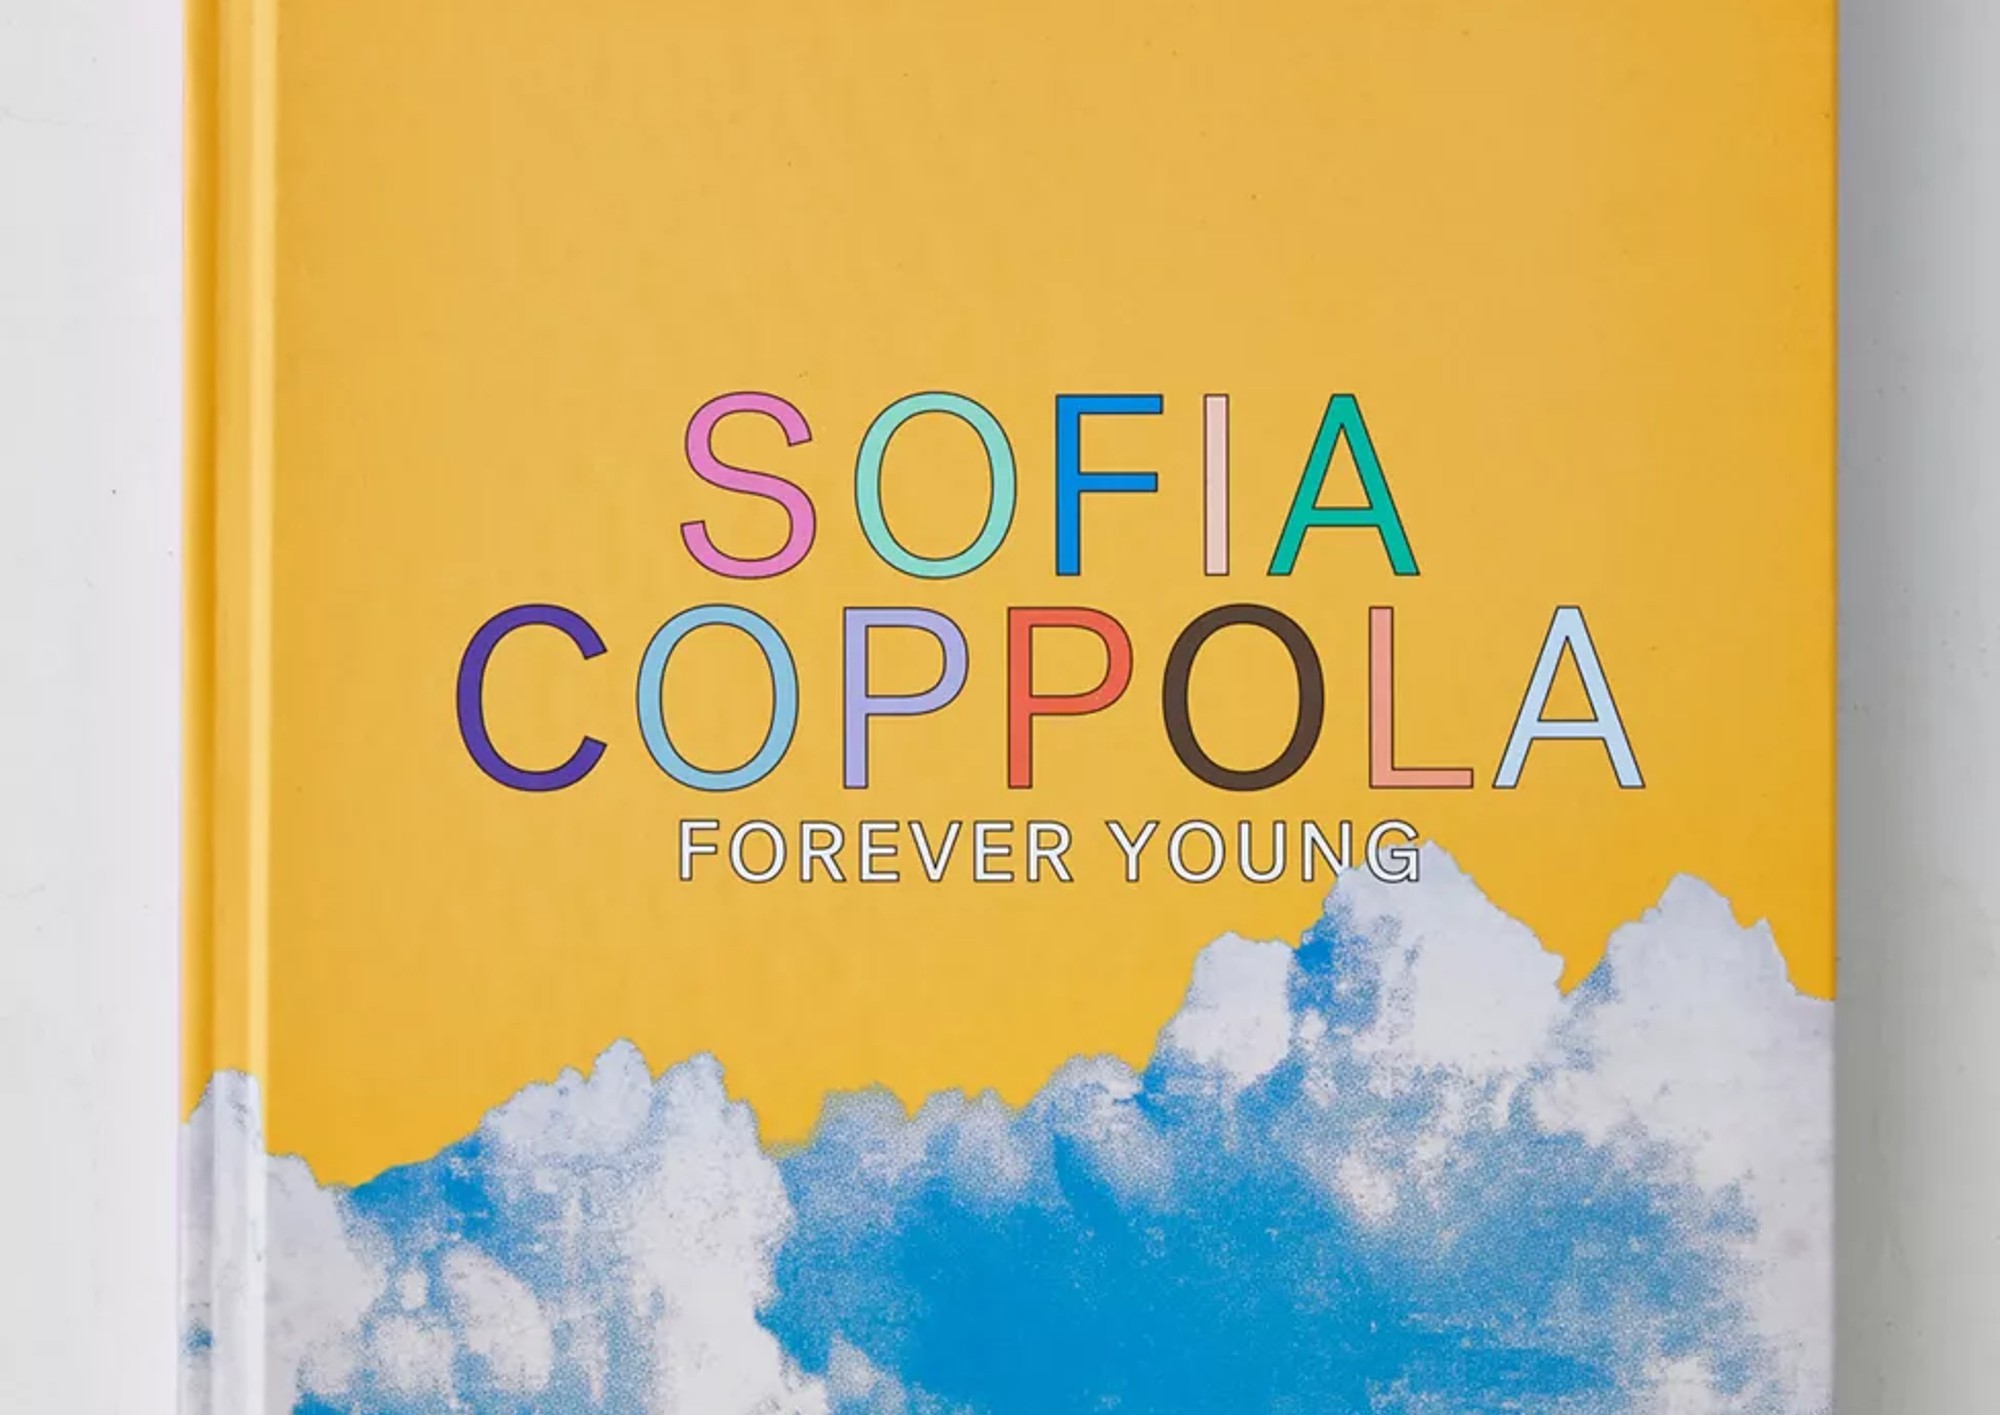 Publicity image of book Sofia Coppola: Forever Young